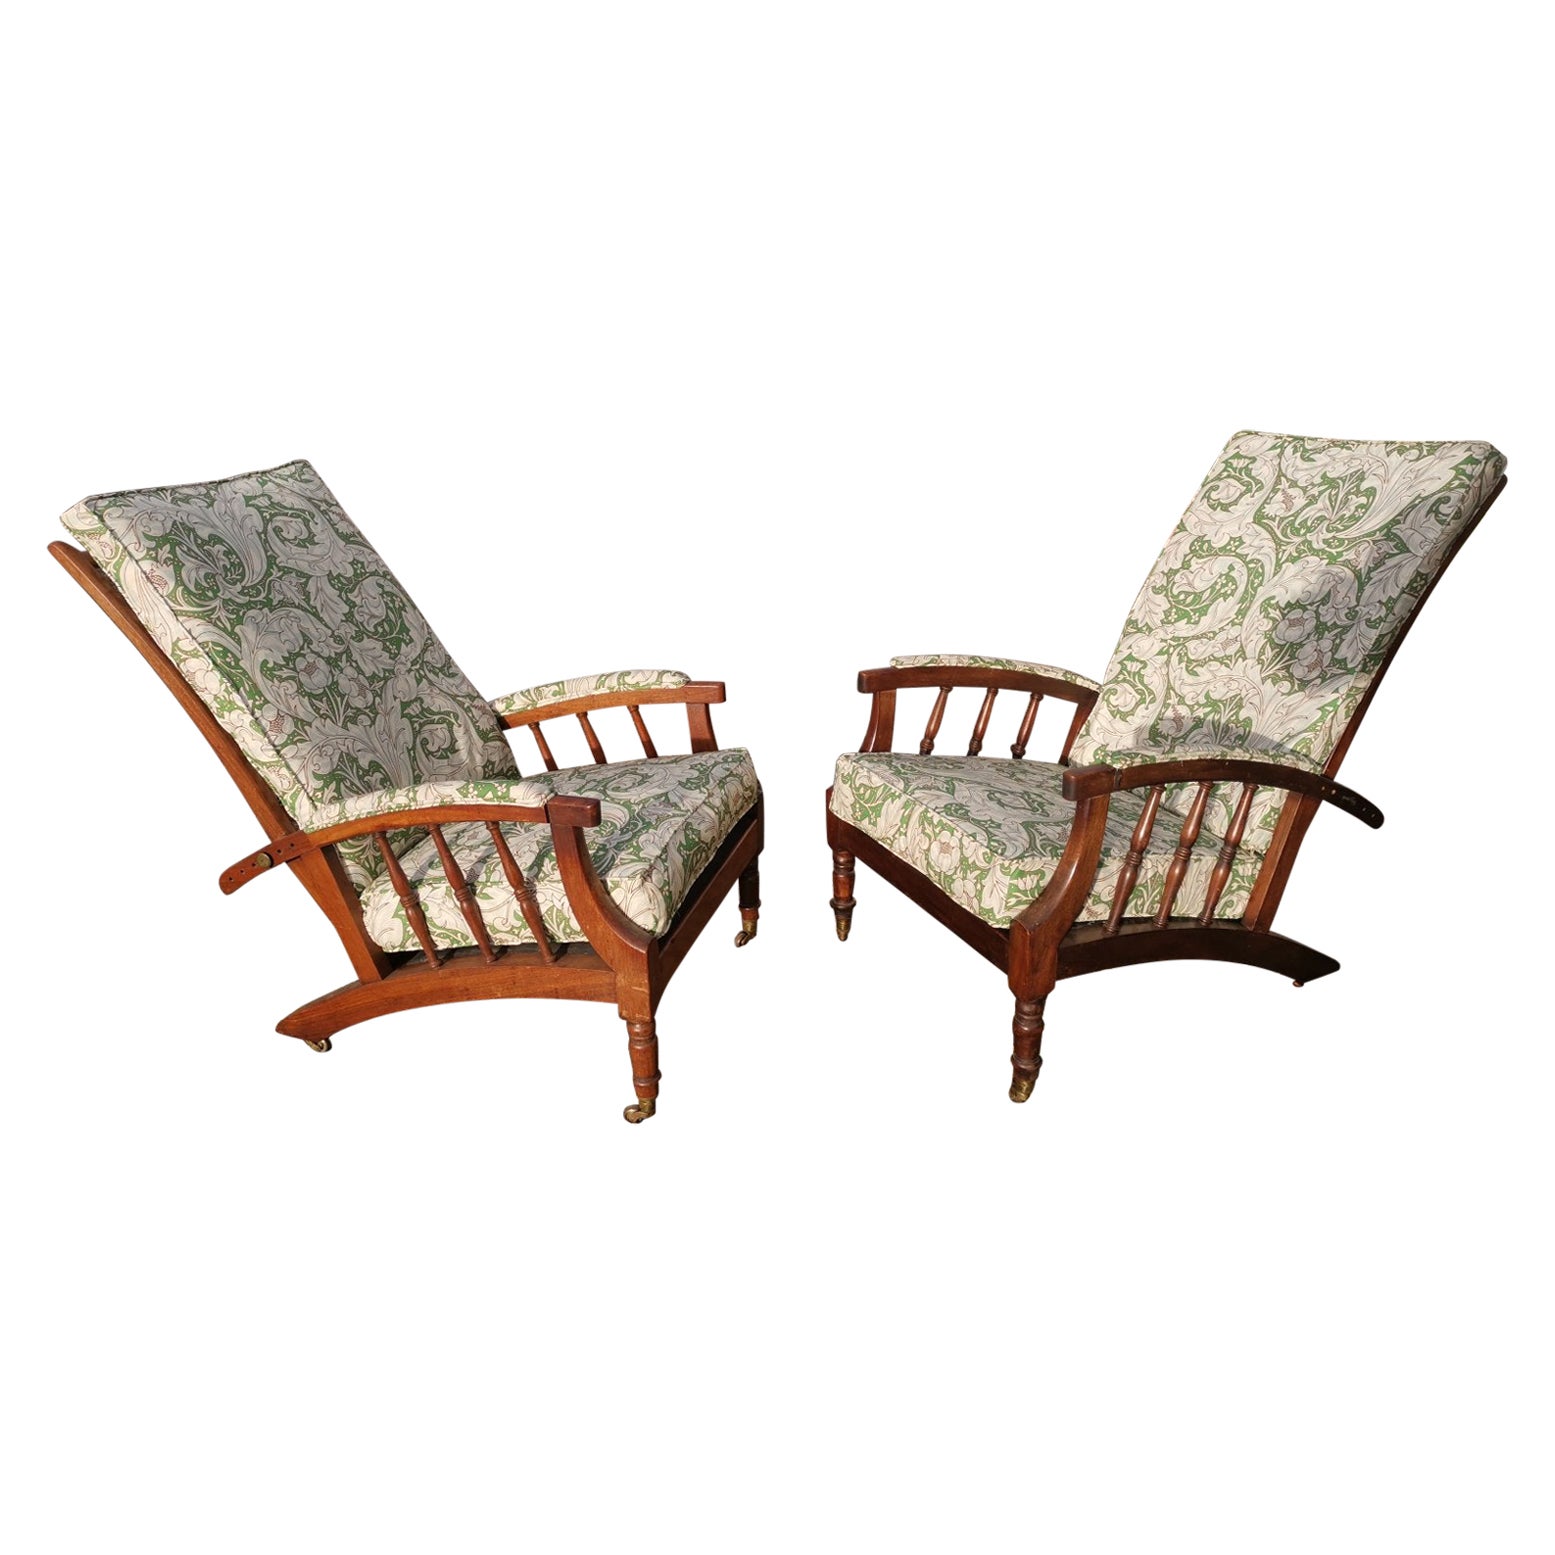 Jas Shoolbred Morris & Co Style a Pair of Aesthetic Movement Reclining Armchairs